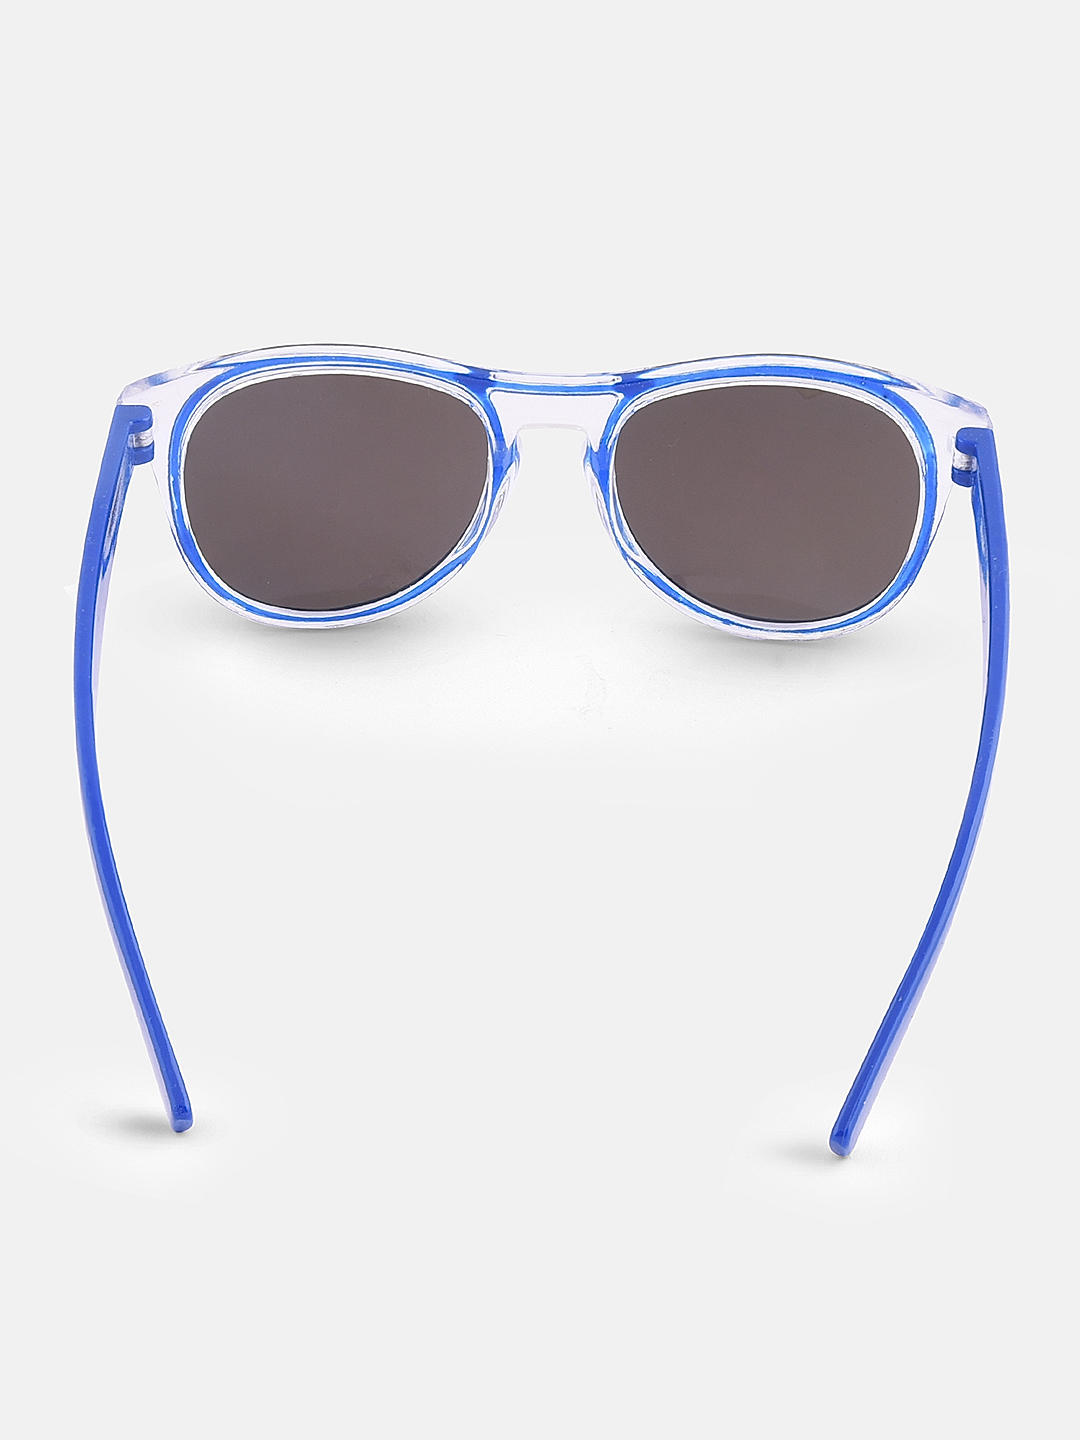 Ray-Ban Aviator Gradient Sunglasses (Blue Gradient Lens, Blue Frame) in  Kanpur at best price by Sagar Optical - Justdial